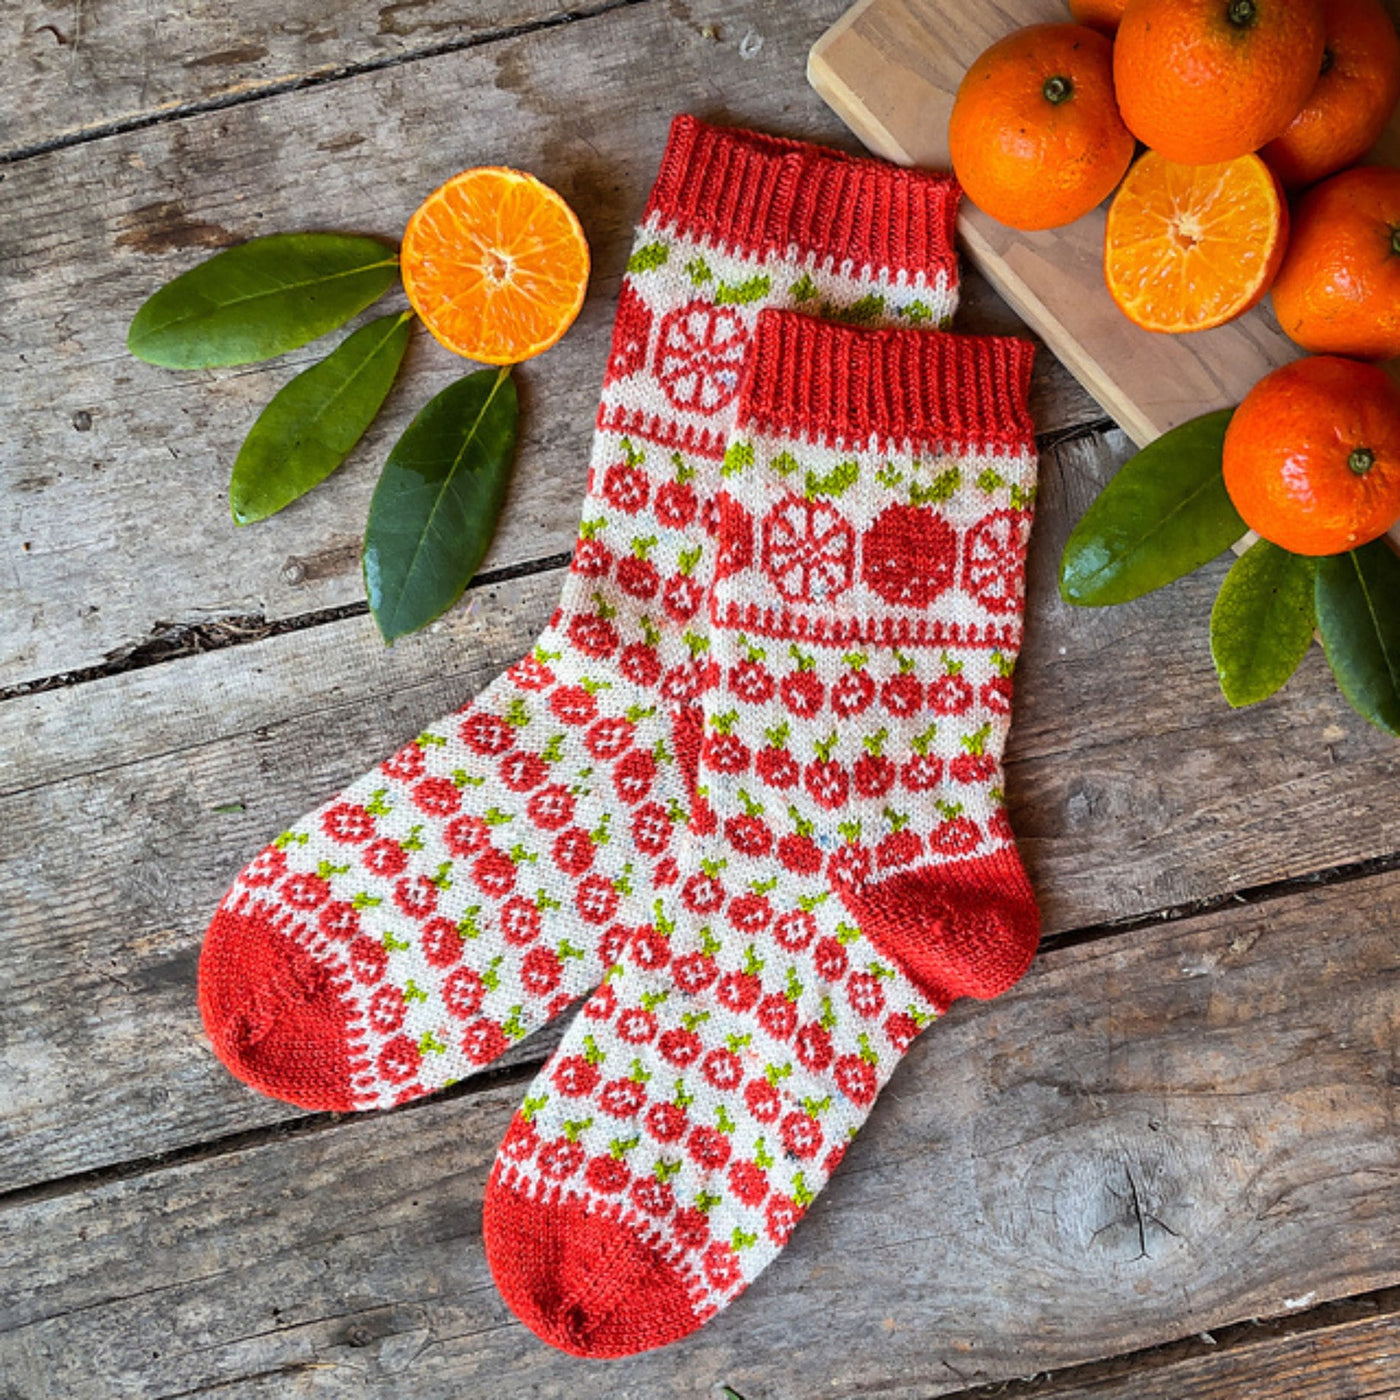 Two white socks on a wooden table near oranges with an all-over oranges motif